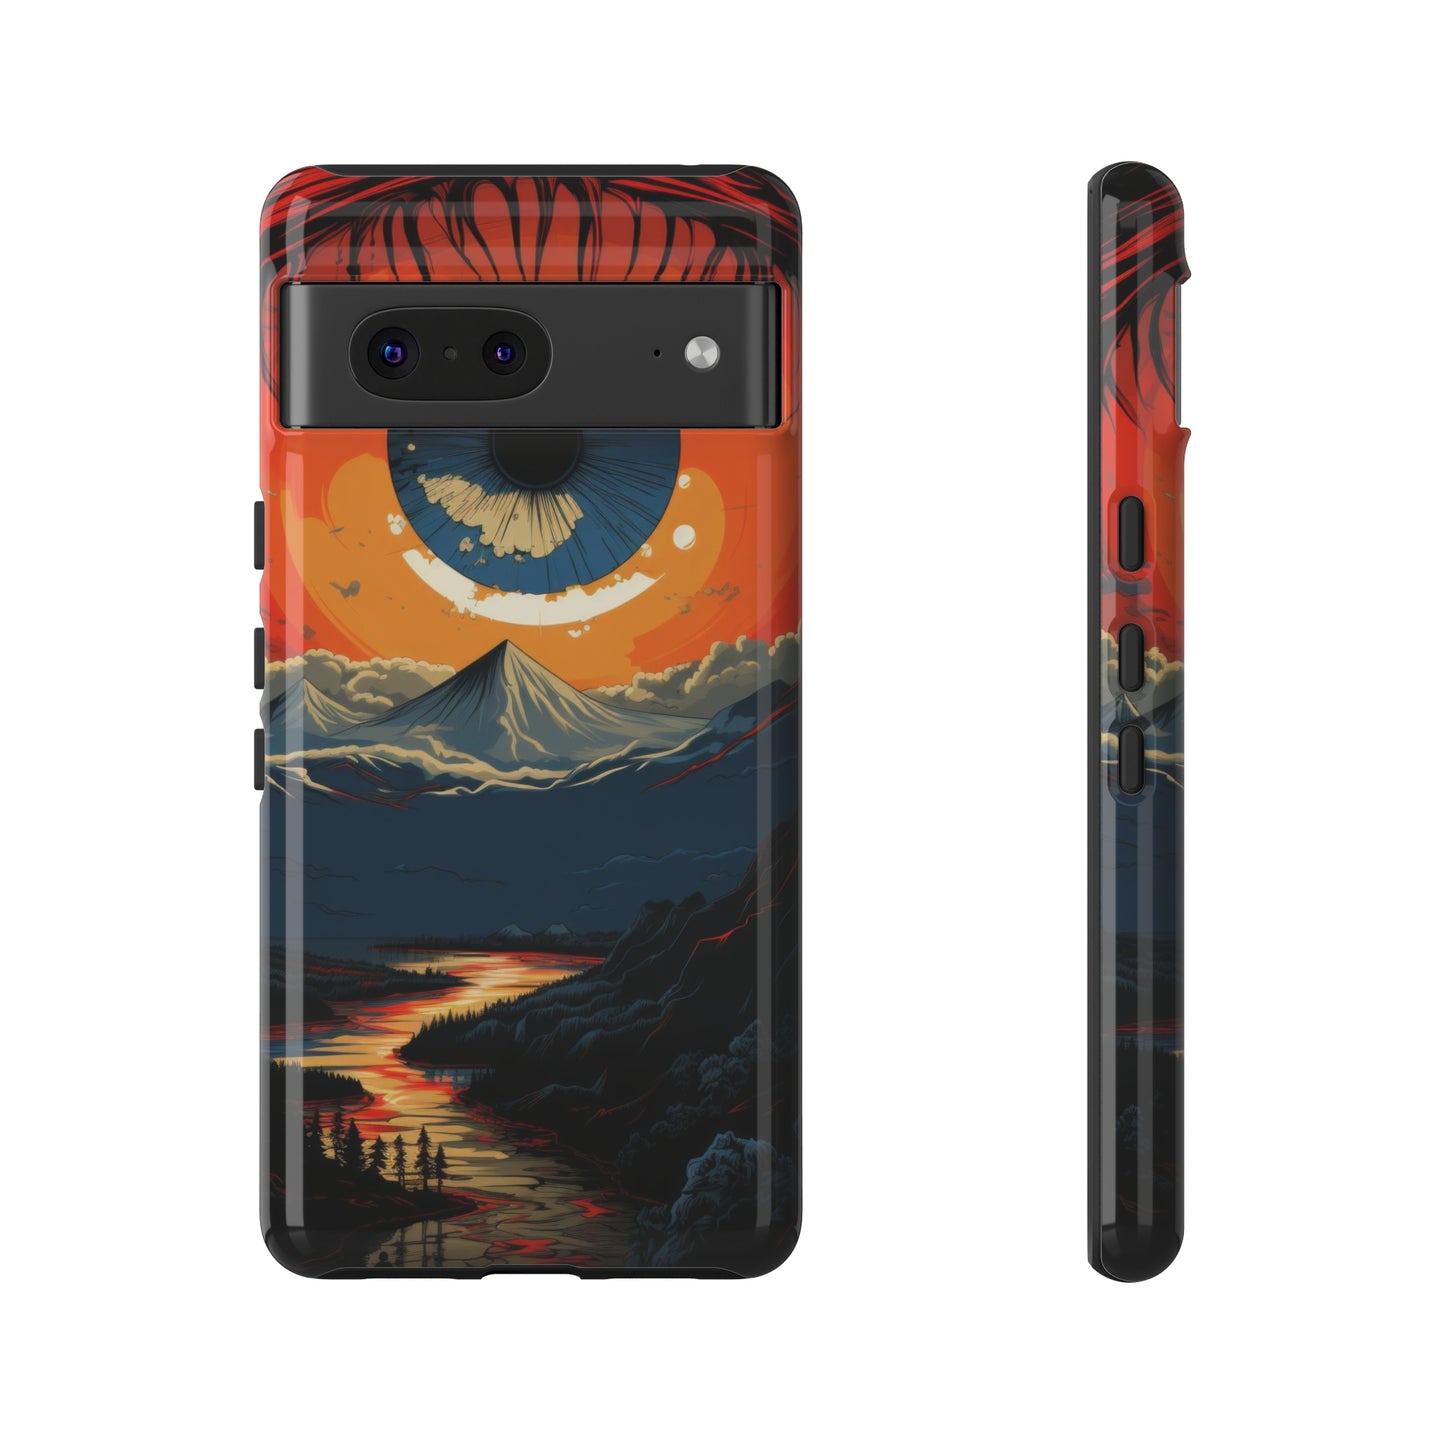 Eyescape: Surreal Blue Pupil with Mountain View Phone Case for iPhone, Samsung, Pixel